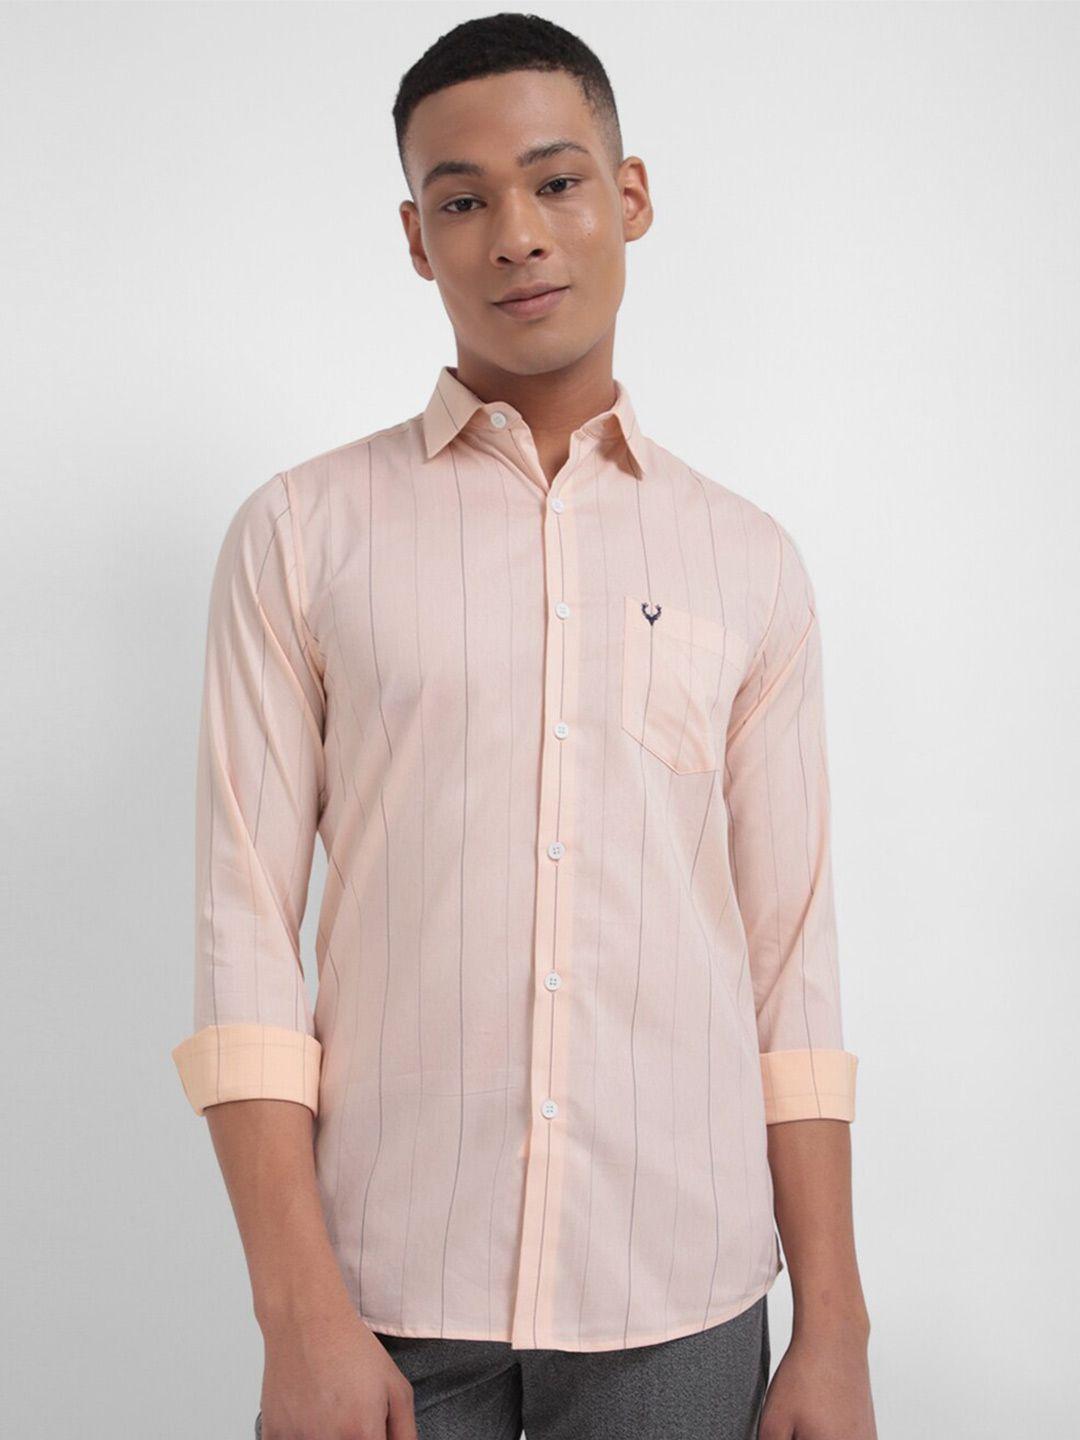 allen solly vertical striped slim fit casual shirt